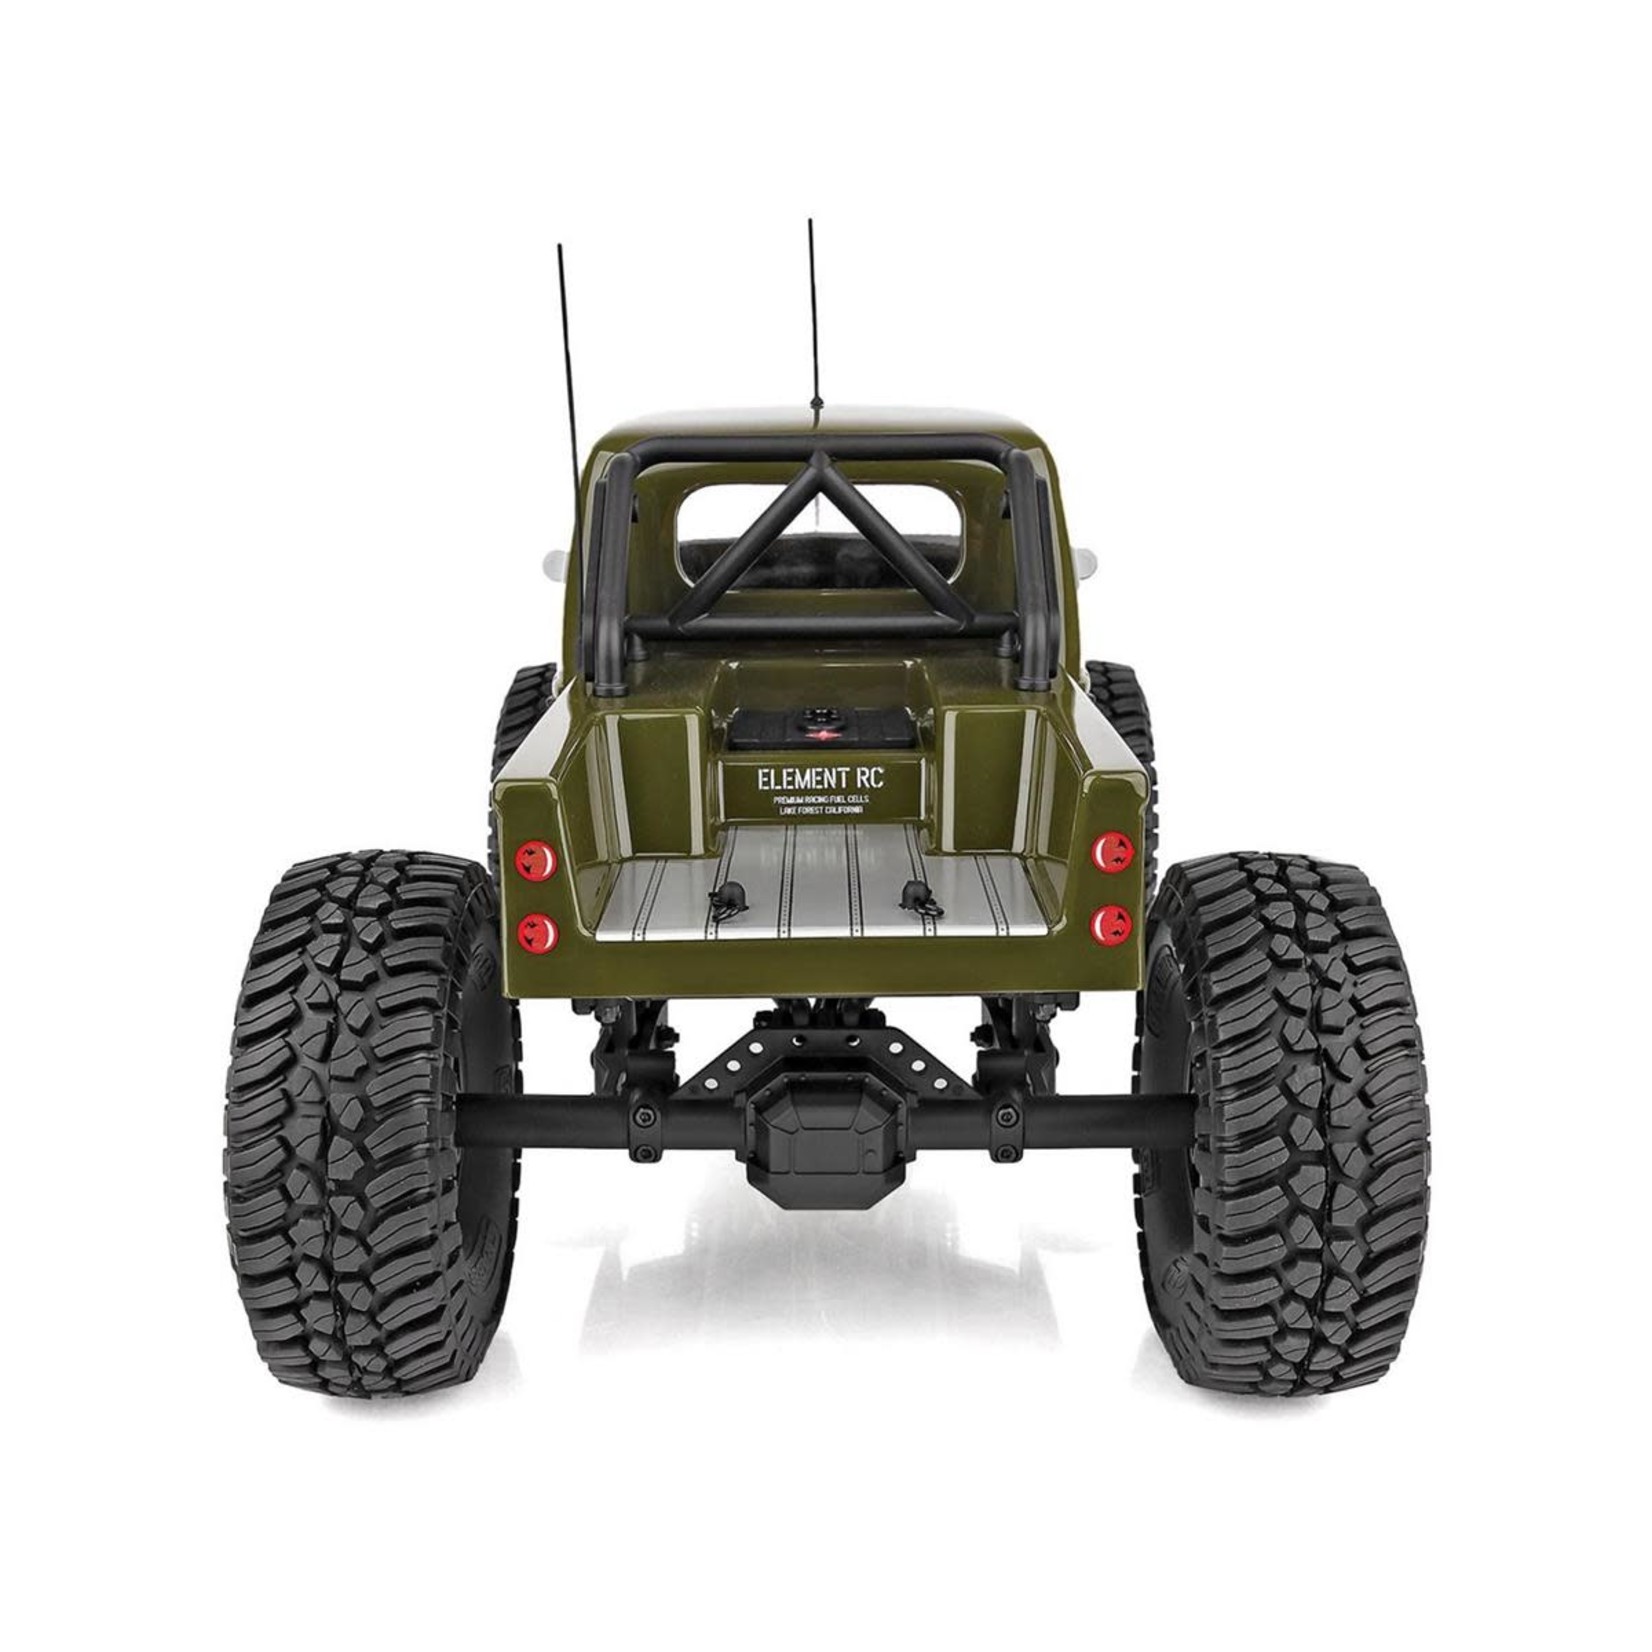 Element RC Element RC Enduro Ecto Trail Truck 4x4 RTR 1/10 Rock Crawler Combo (Green) w/2.4GHz Radio, Battery & Charger #40117C